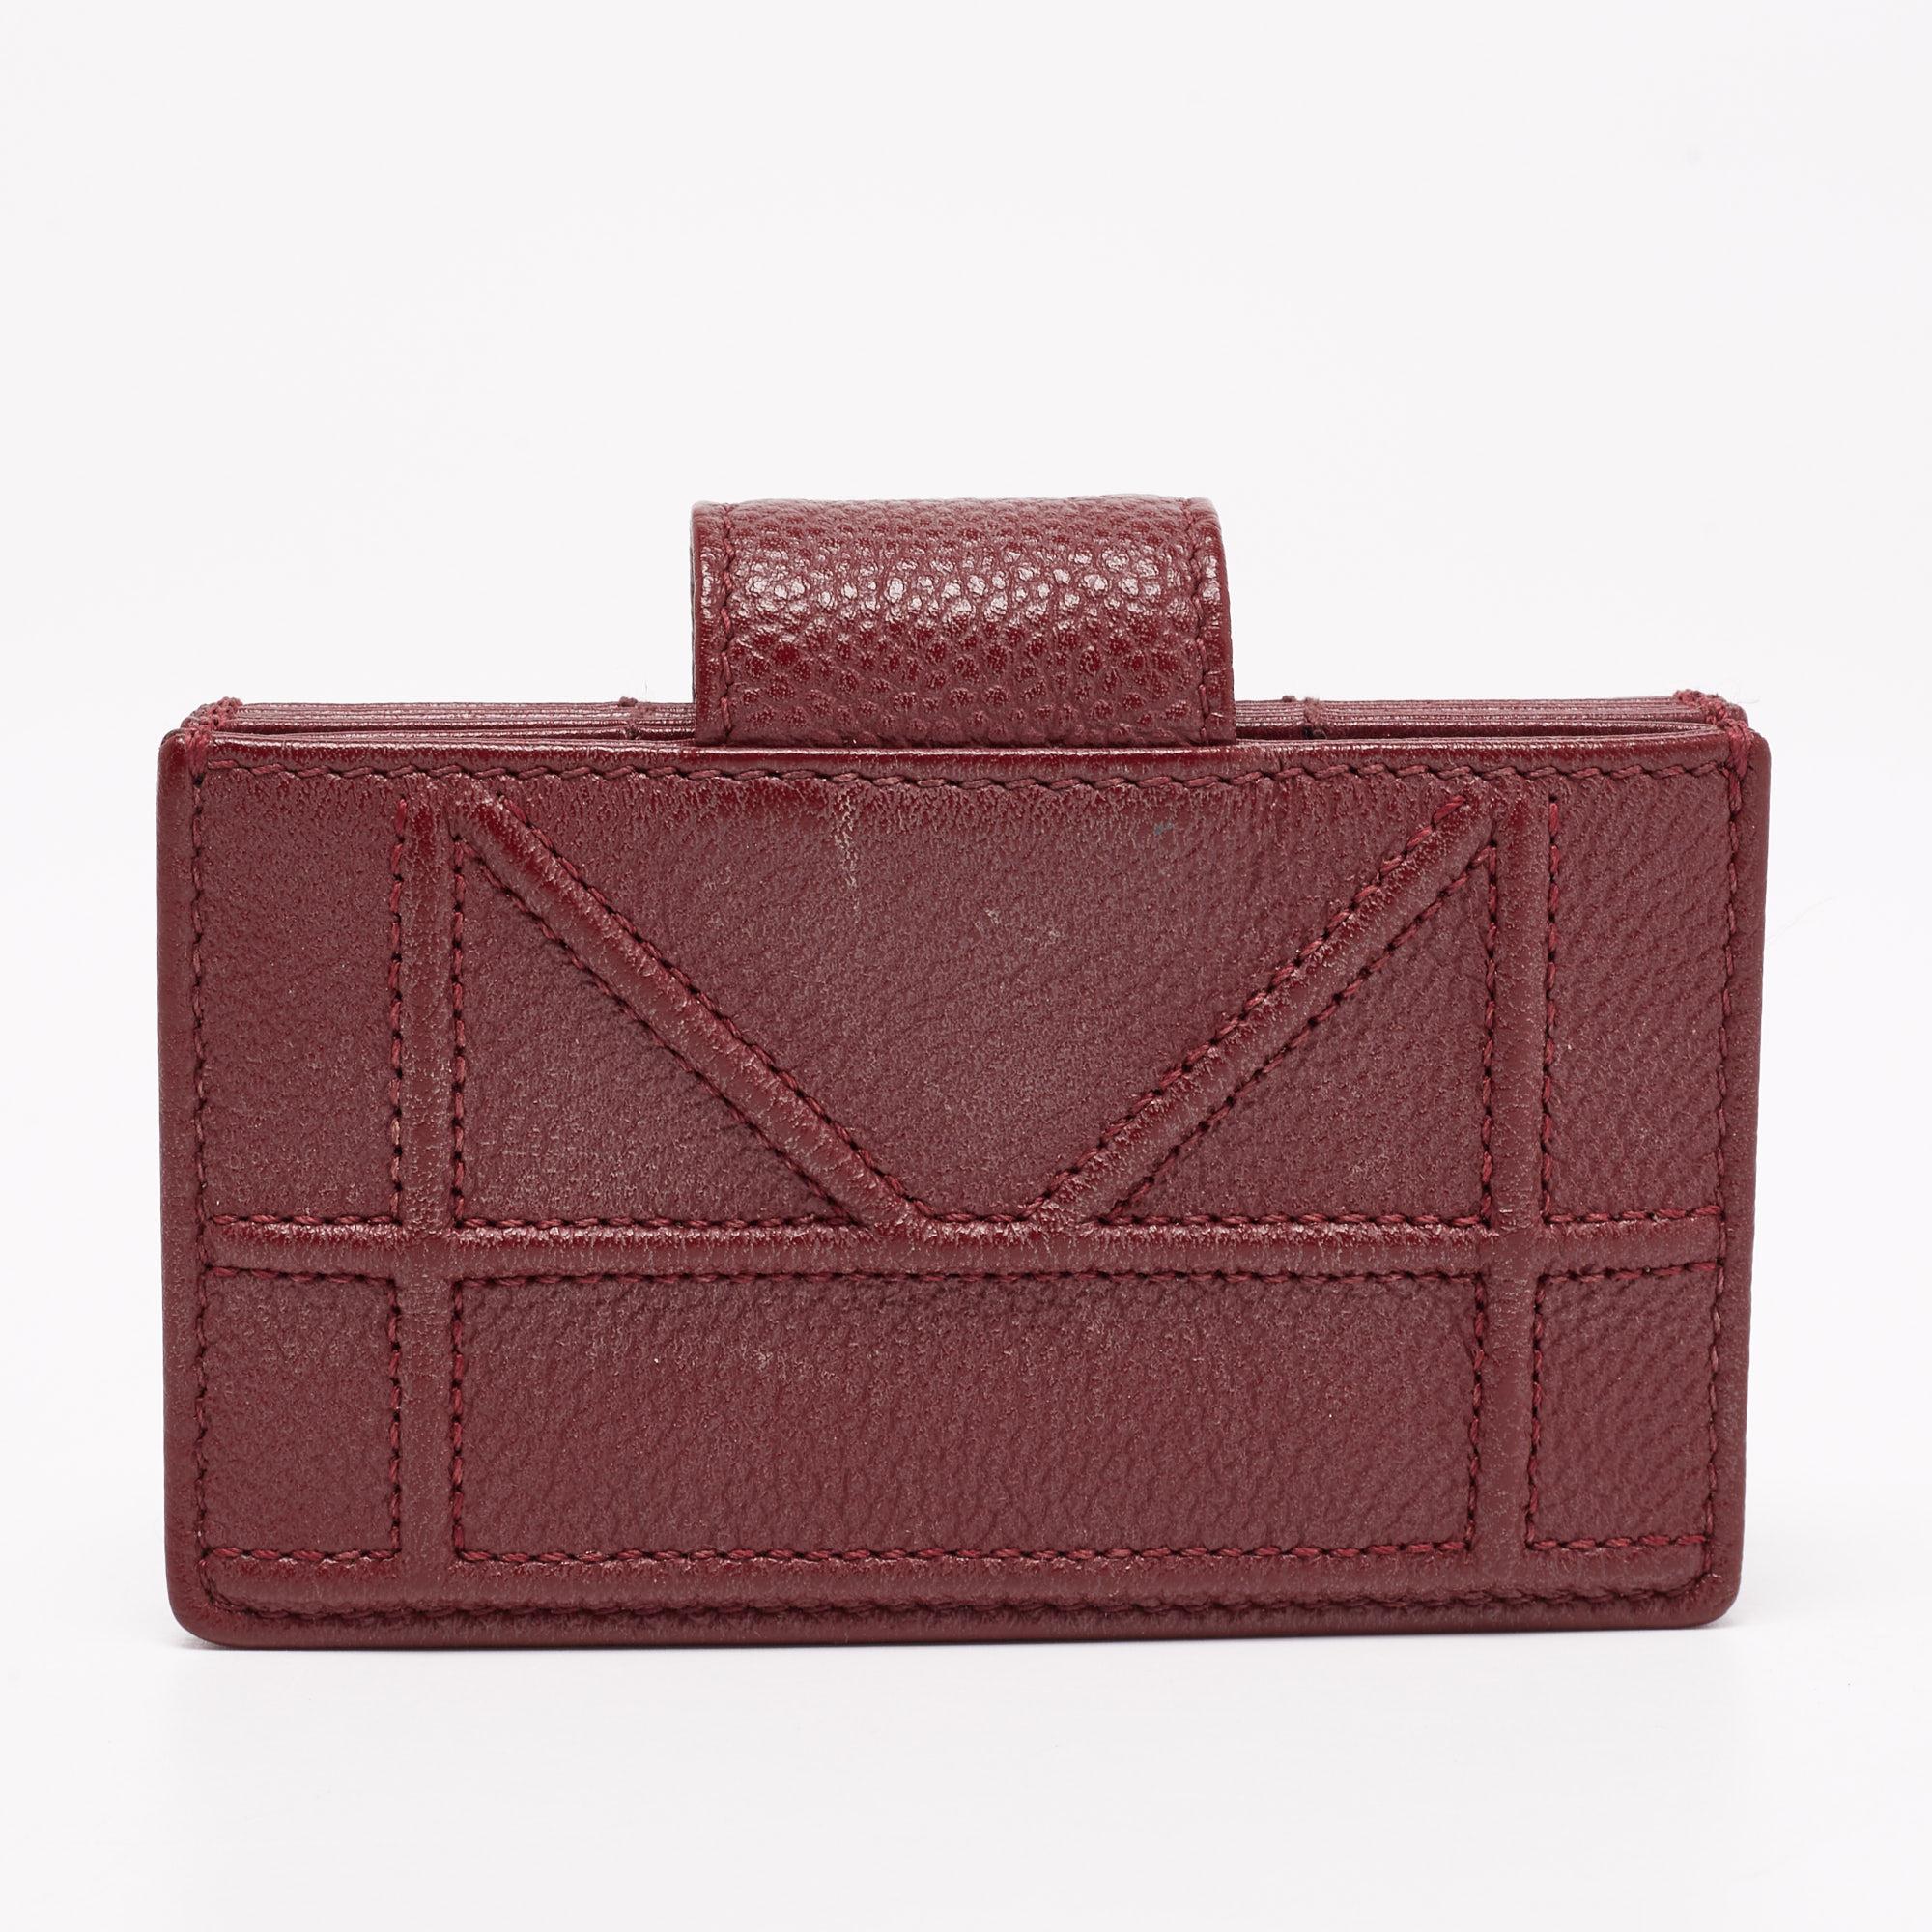 Crafted from leather, this Dior gusset cardholder opens to reveal multiple compartments to carry your cards neatly. It also features the brand's iconic Cannage quilt detailed on the exterior. This burgundy piece is sleek and can easily be carried.